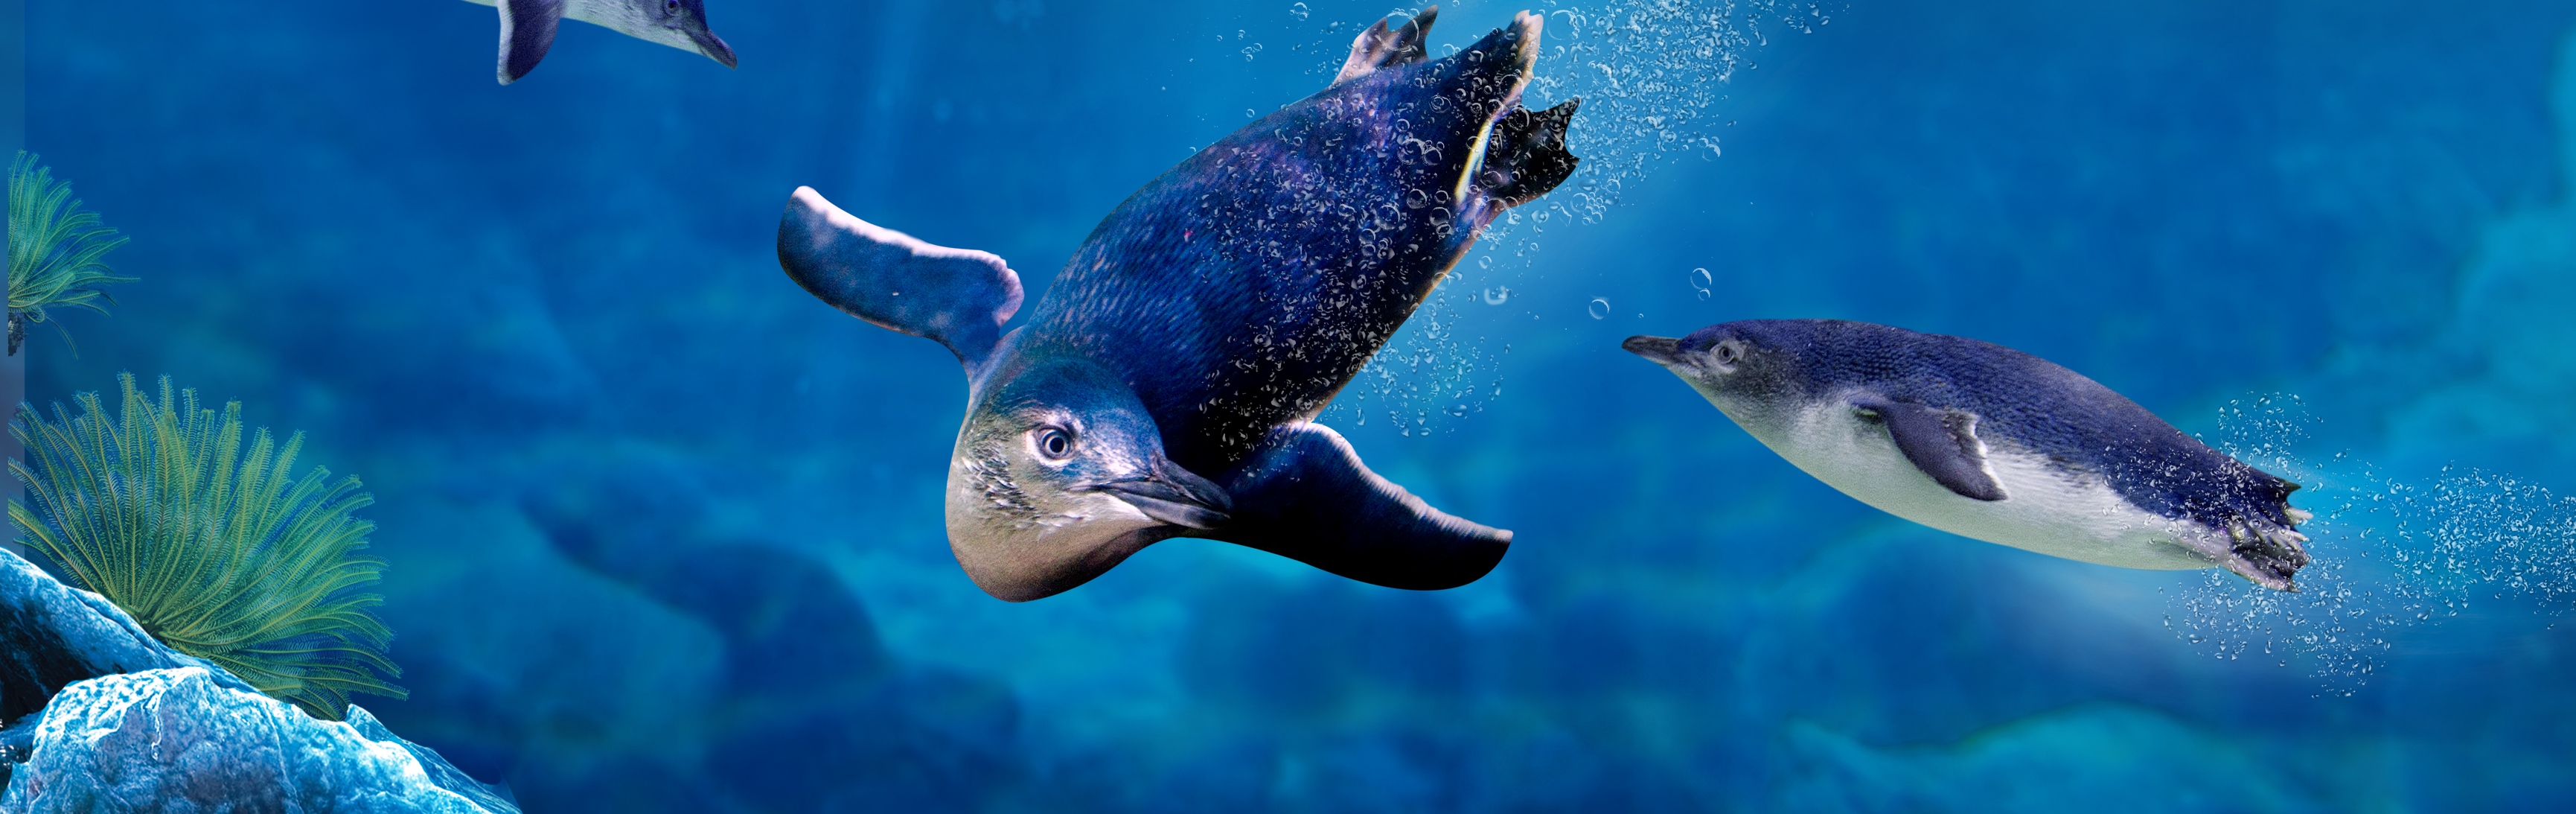 penguin swimming in blue water